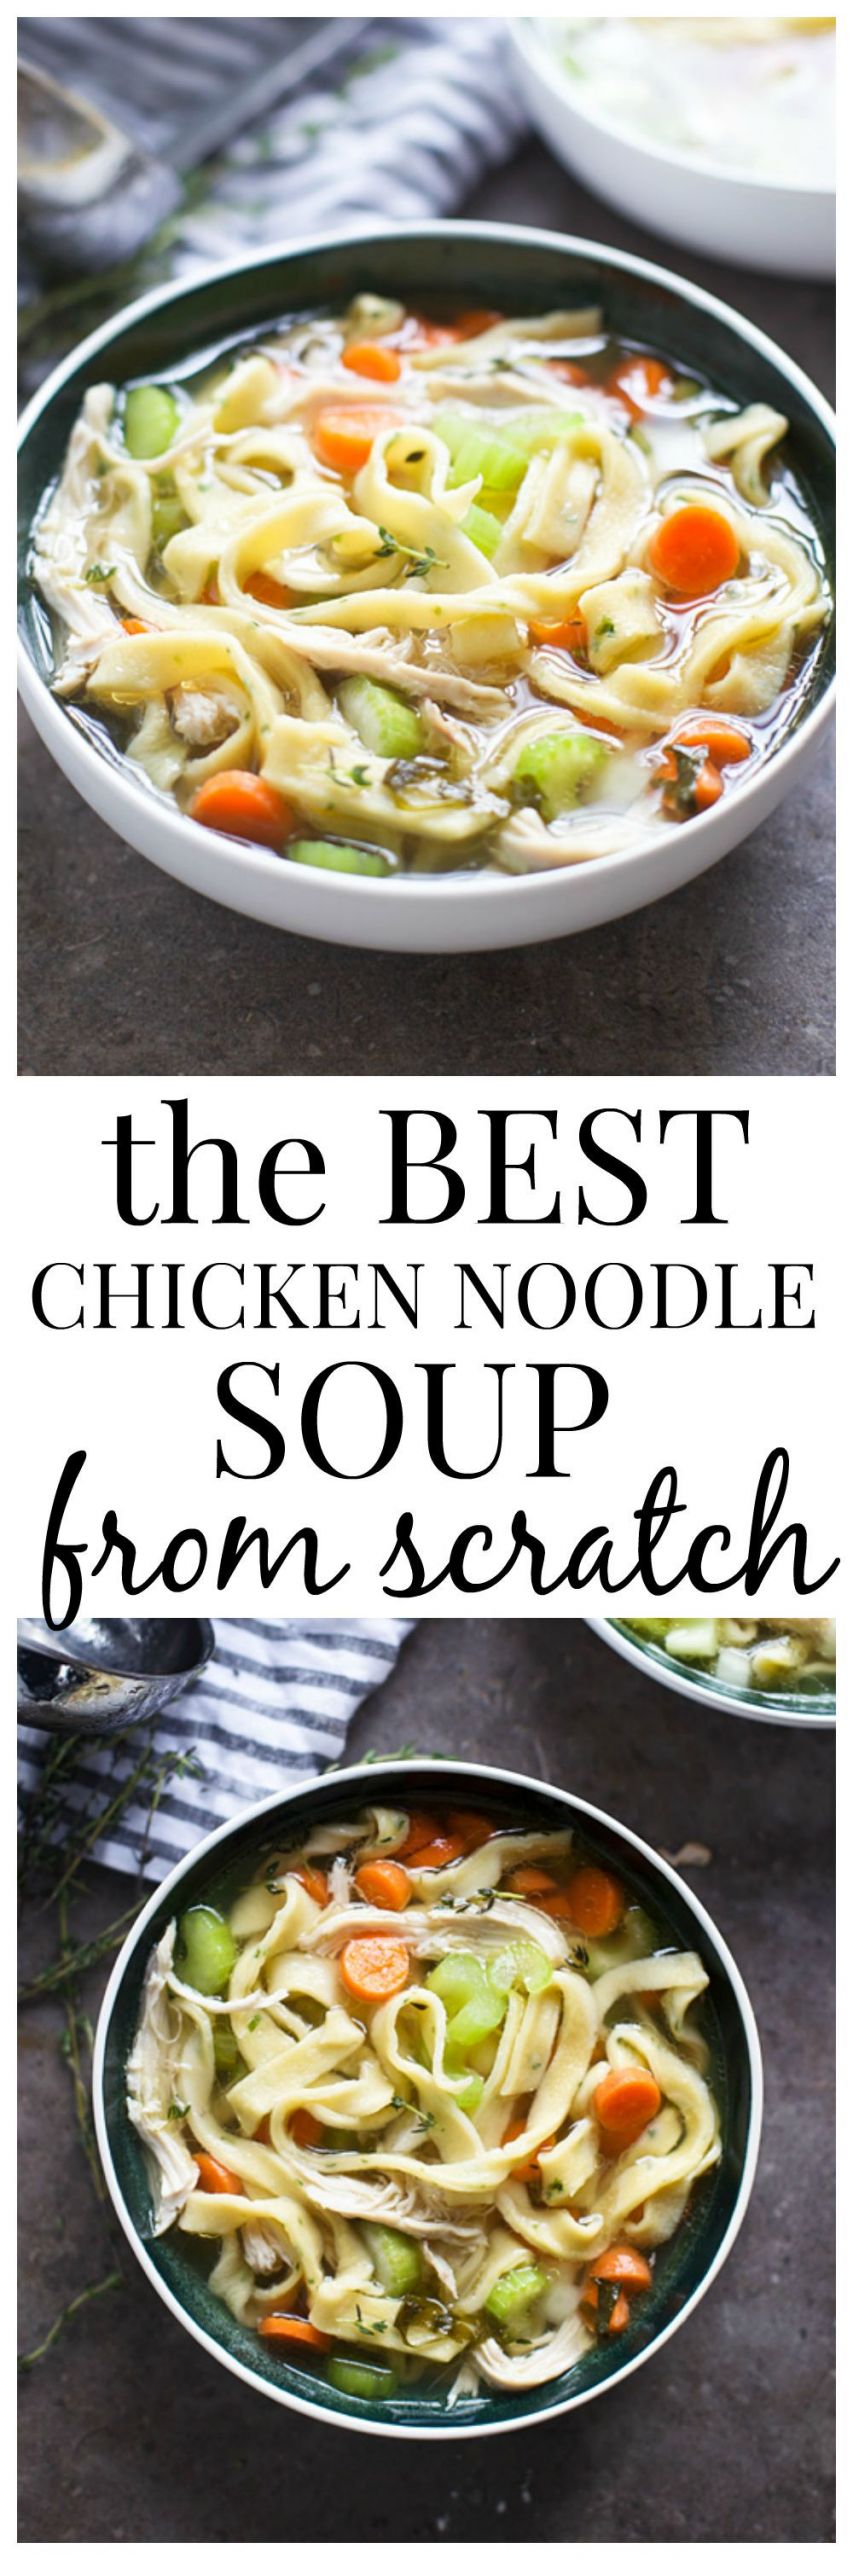 Best Homemade Chicken Soup Recipe Scratch
 Pin on Bloggers Best Healthy Recipes